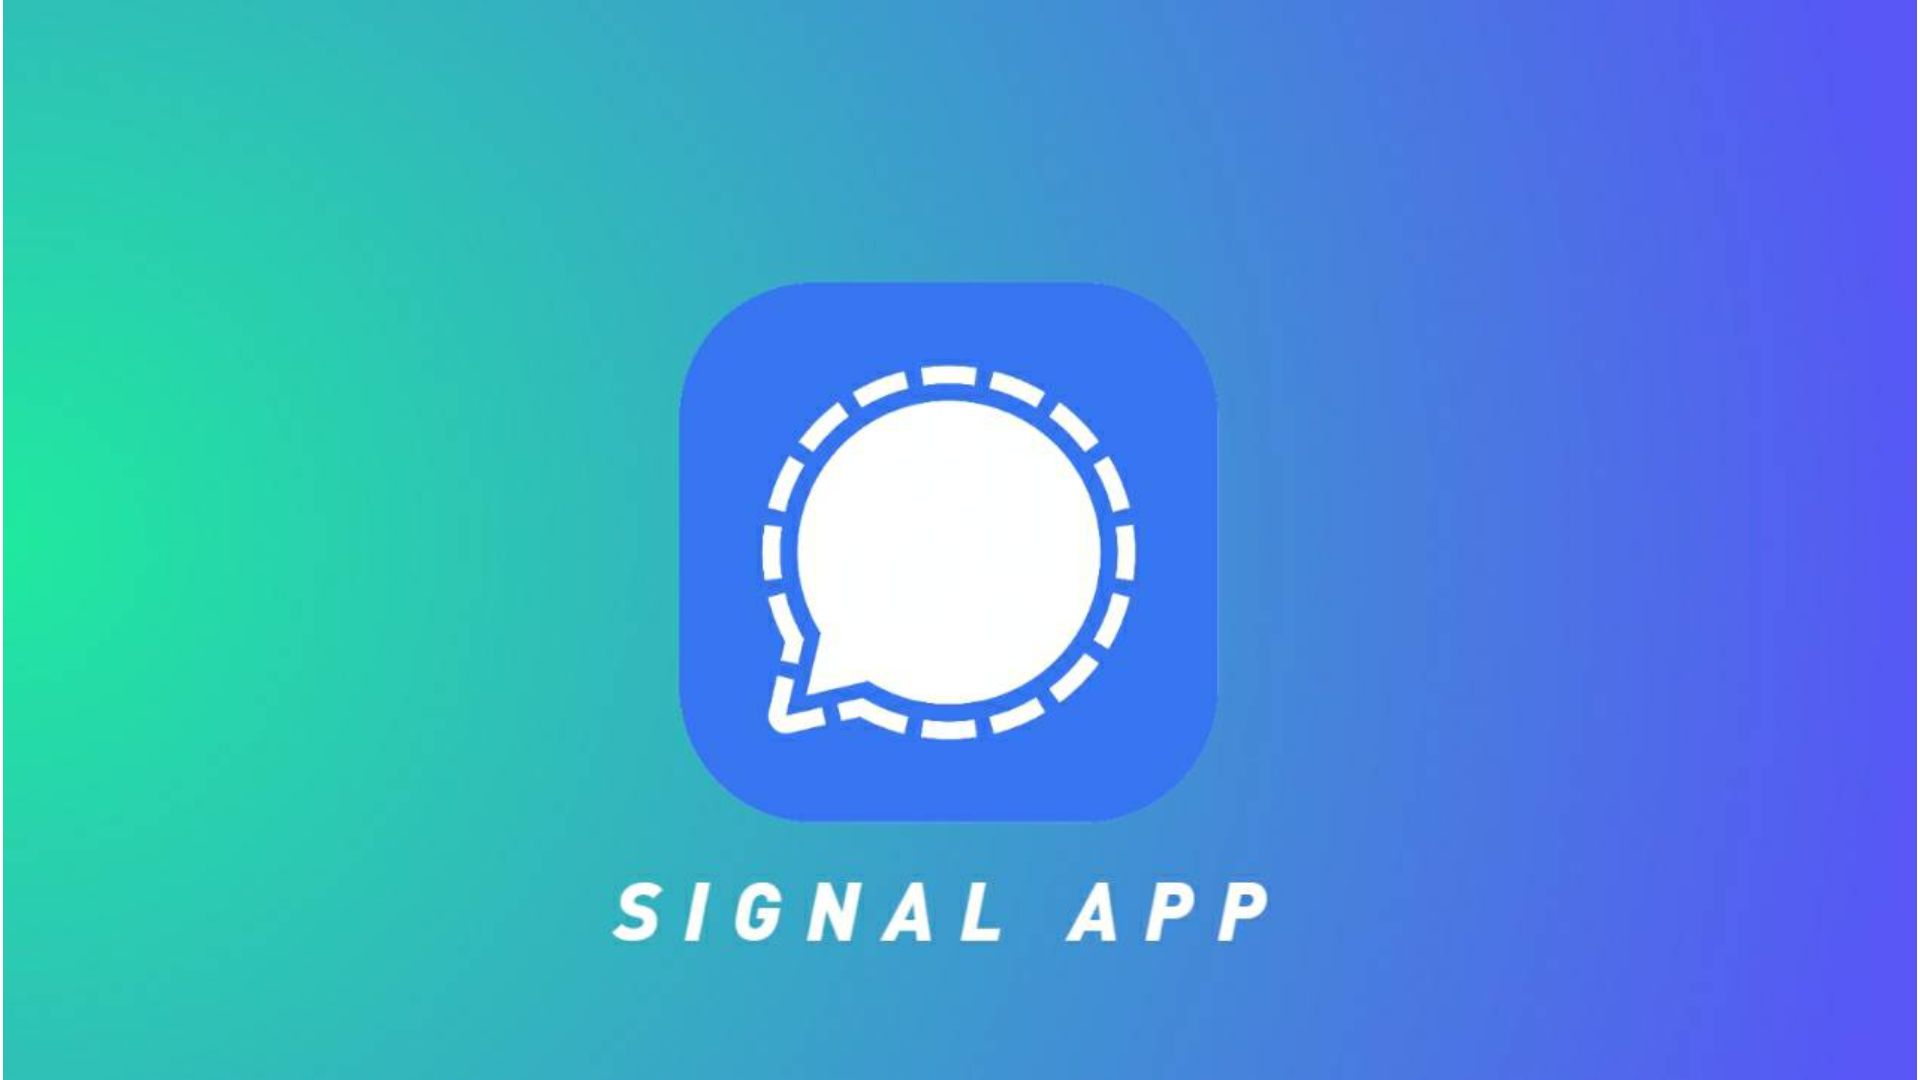 How to use the signal app